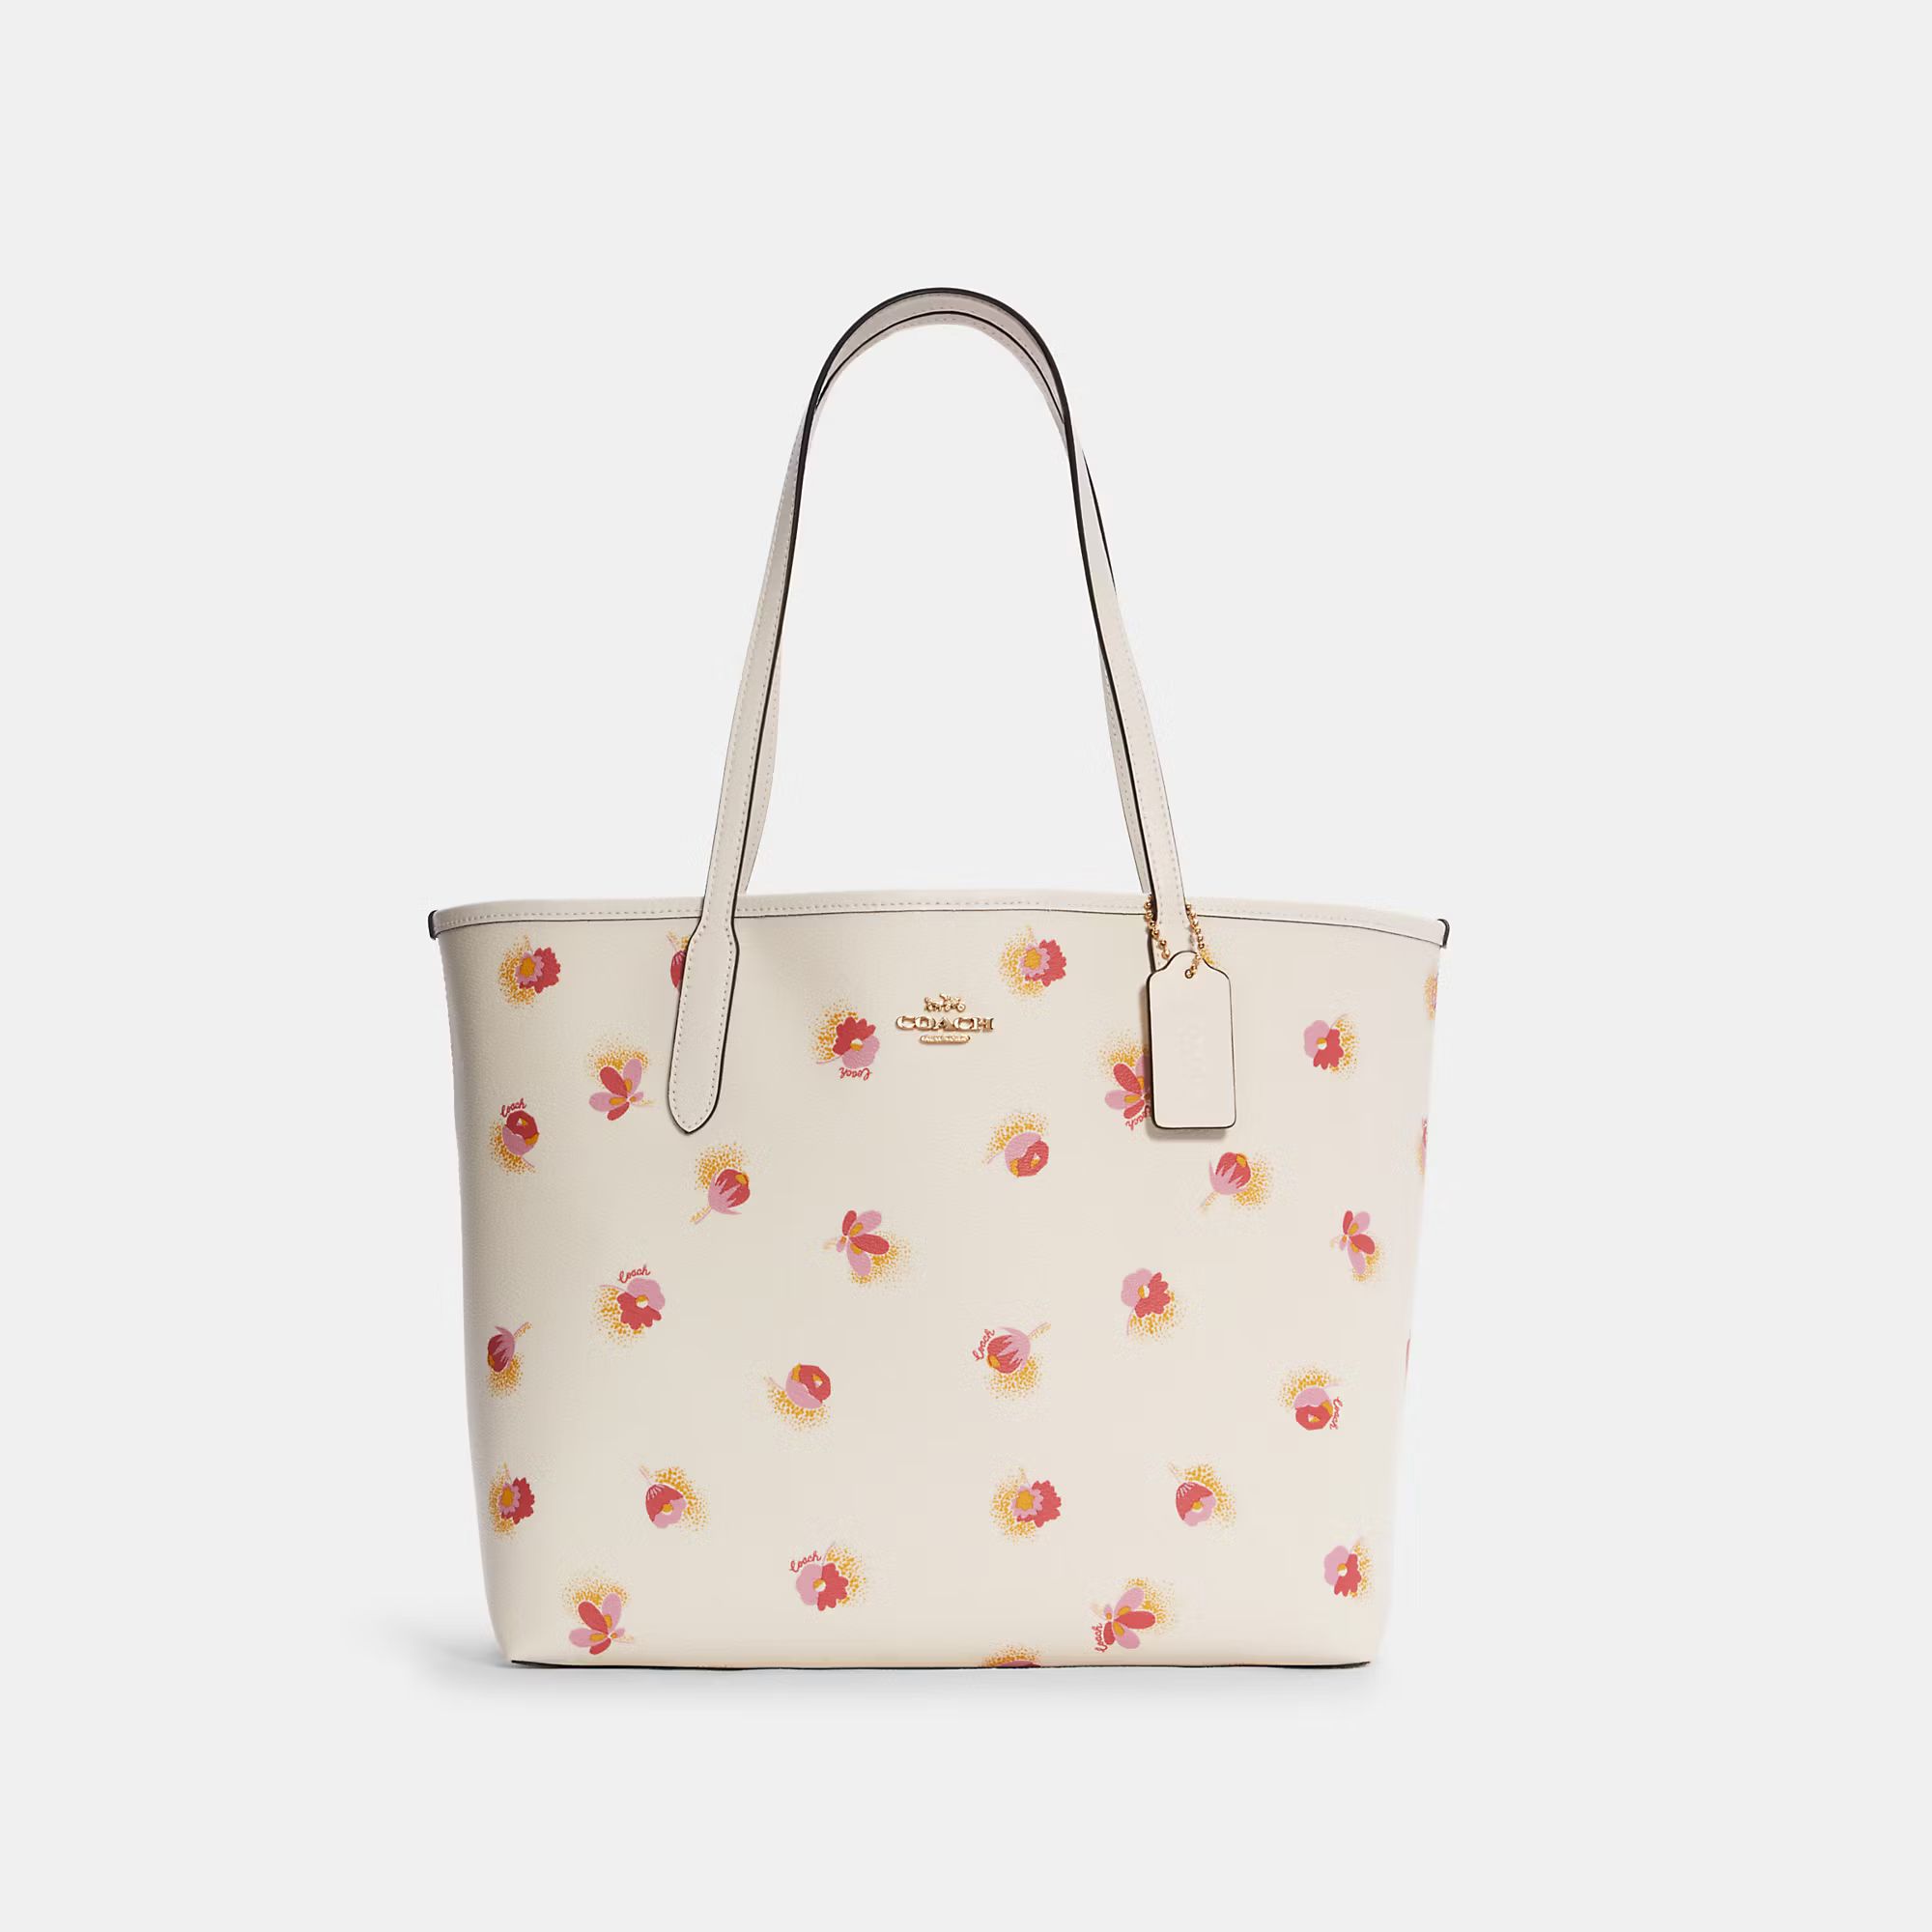 COACH Women's City Tote With Pop Floral Print - White | Coach Outlet